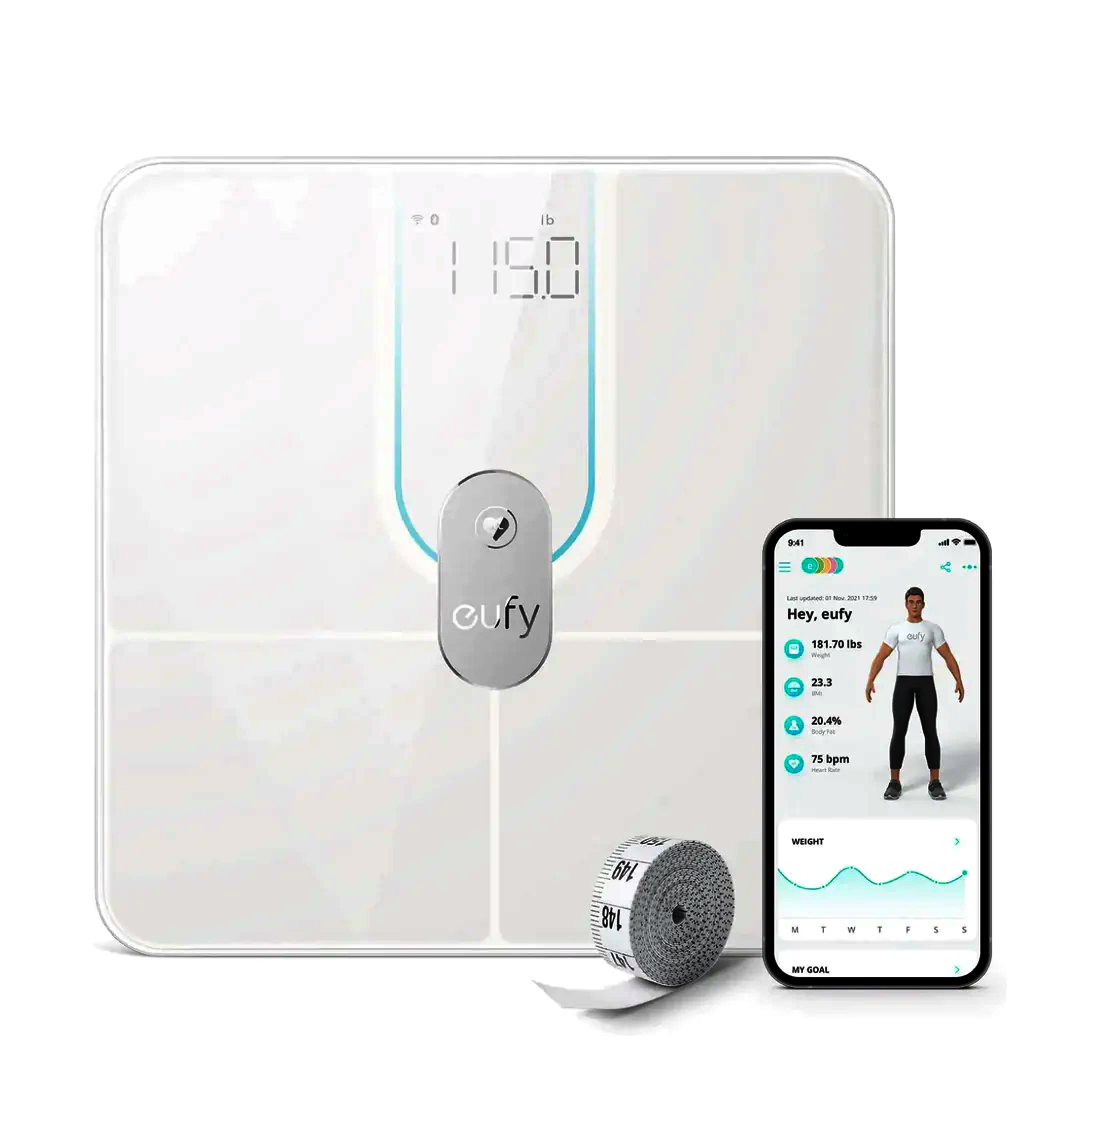  eufy Smart Scale P2, Digital Bathroom Scale with Wi-Fi,  Bluetooth, 15 Measurements Including Weight, Body Fat, BMI, Muscle & Bone  Mass, 3D Virtual Body Mod, 50 g/0.1 lb High Accuracy, IPX5